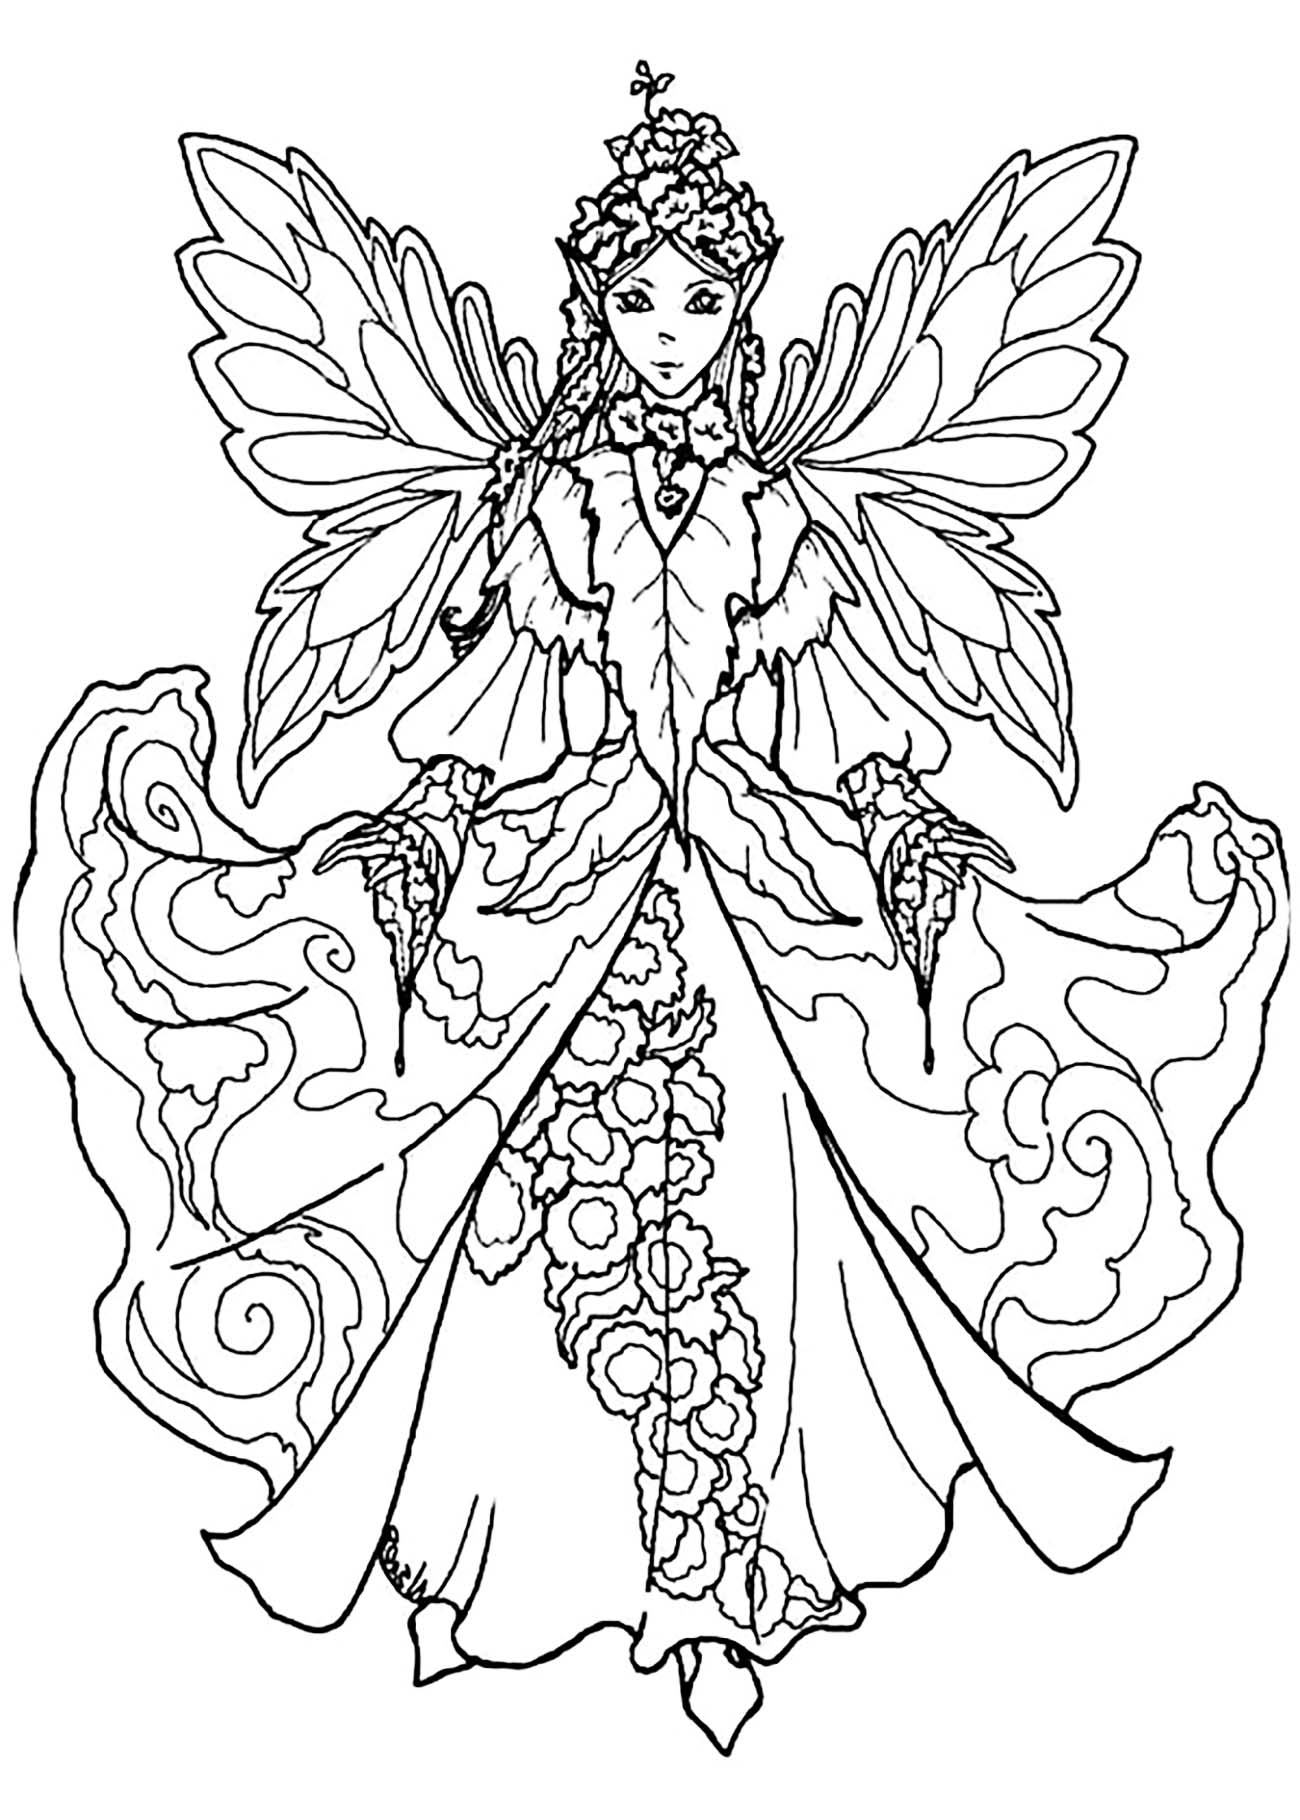 Download Fairy Coloring Pages For Adults